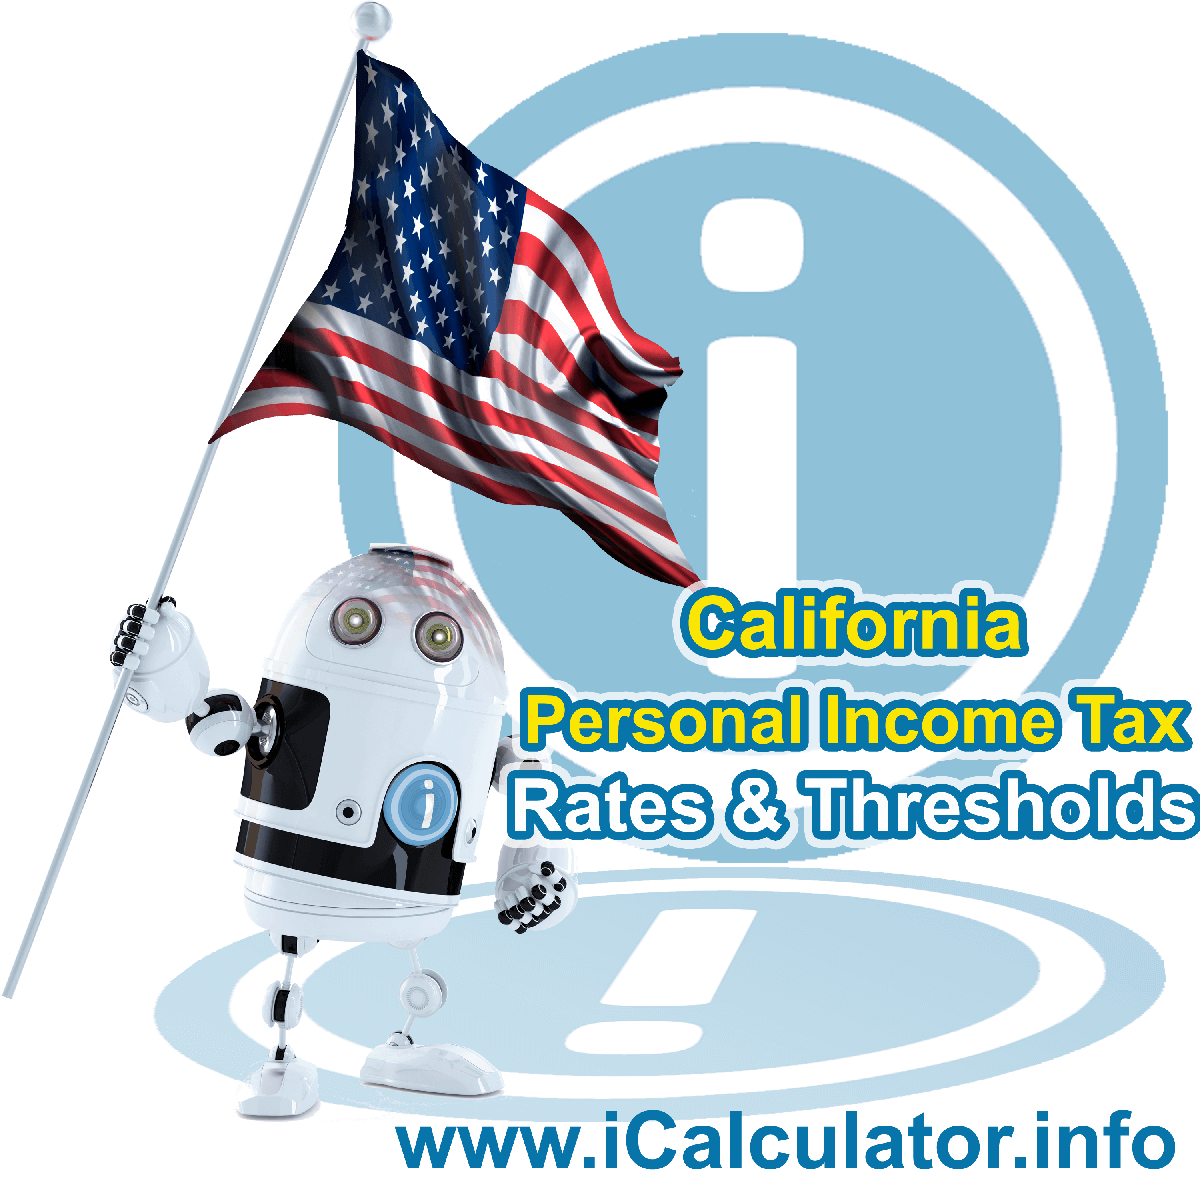 California State Tax Tables 2023. This image displays details of the California State Tax Tables for the 2023 tax return year which is provided in support of the 2023 US Tax Calculator